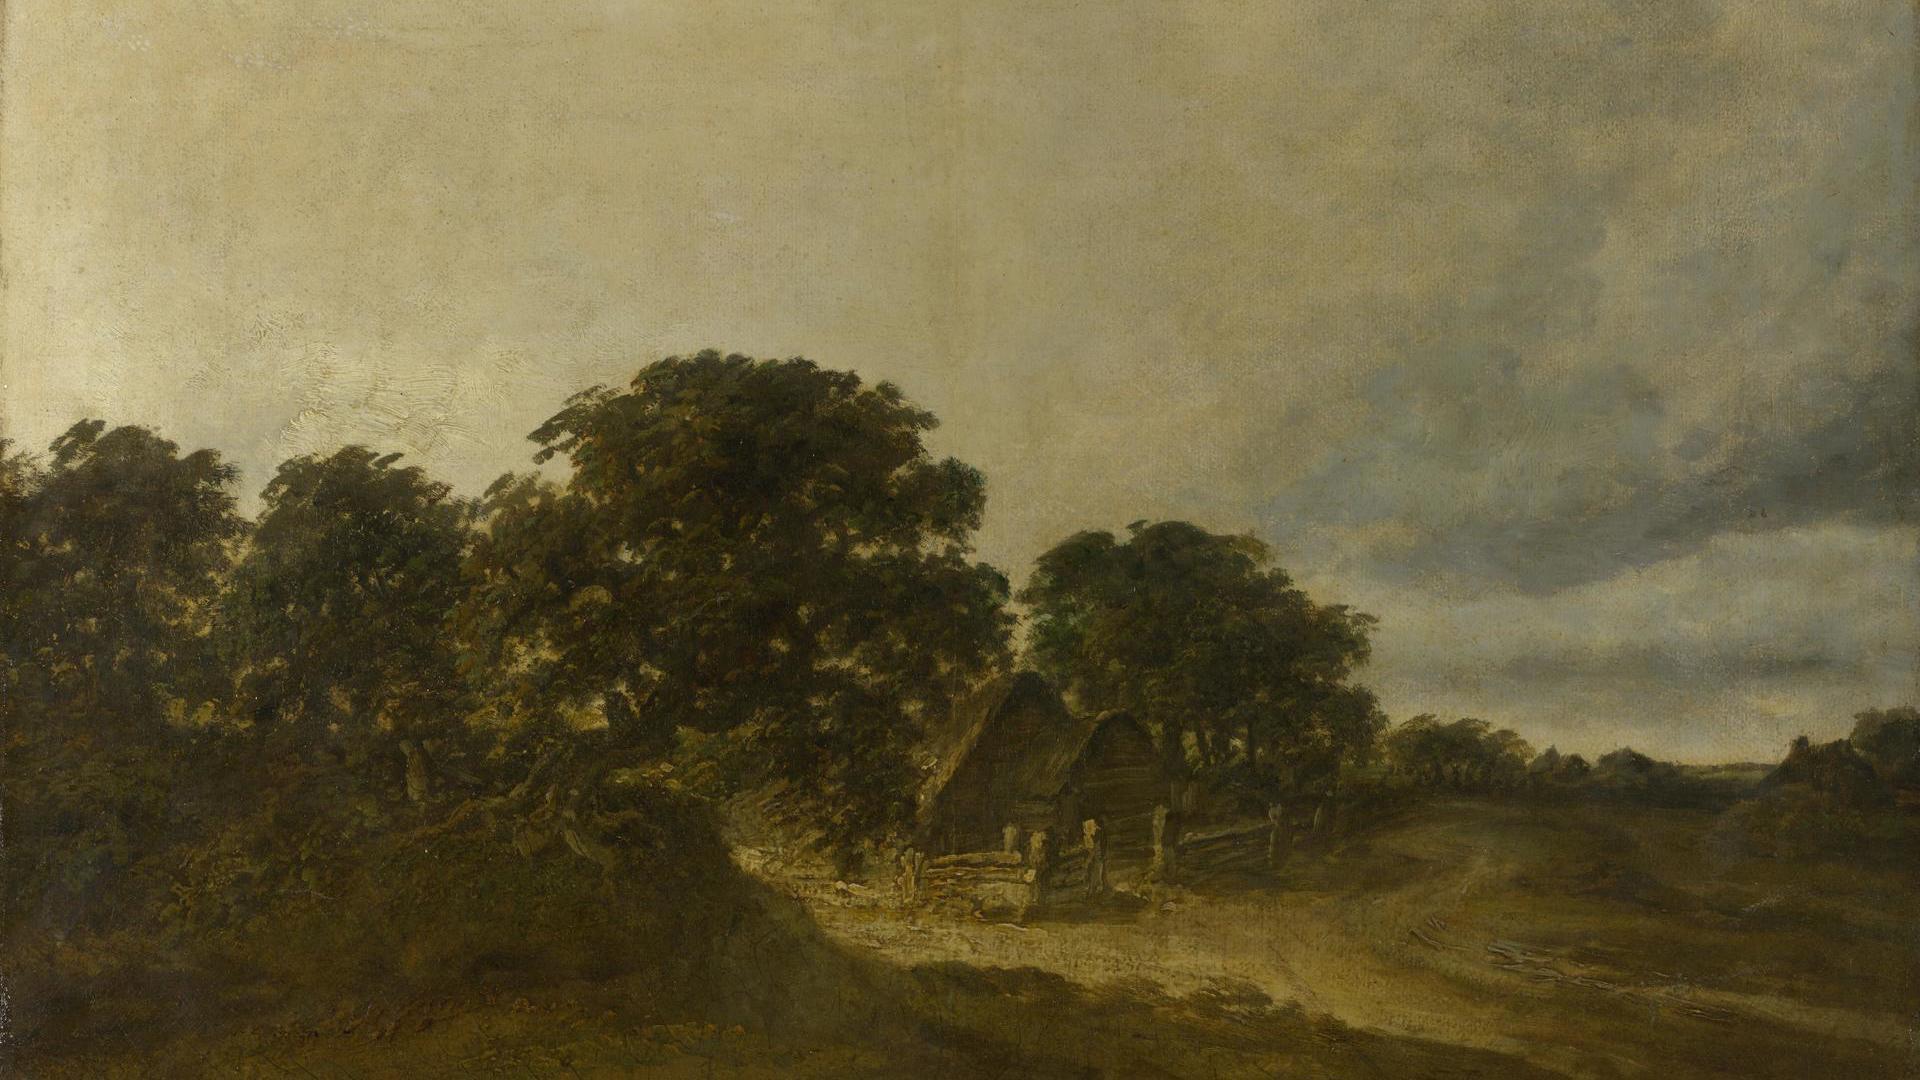 Landscape with Trees, Buildings and a Road by Style of Georges Michel